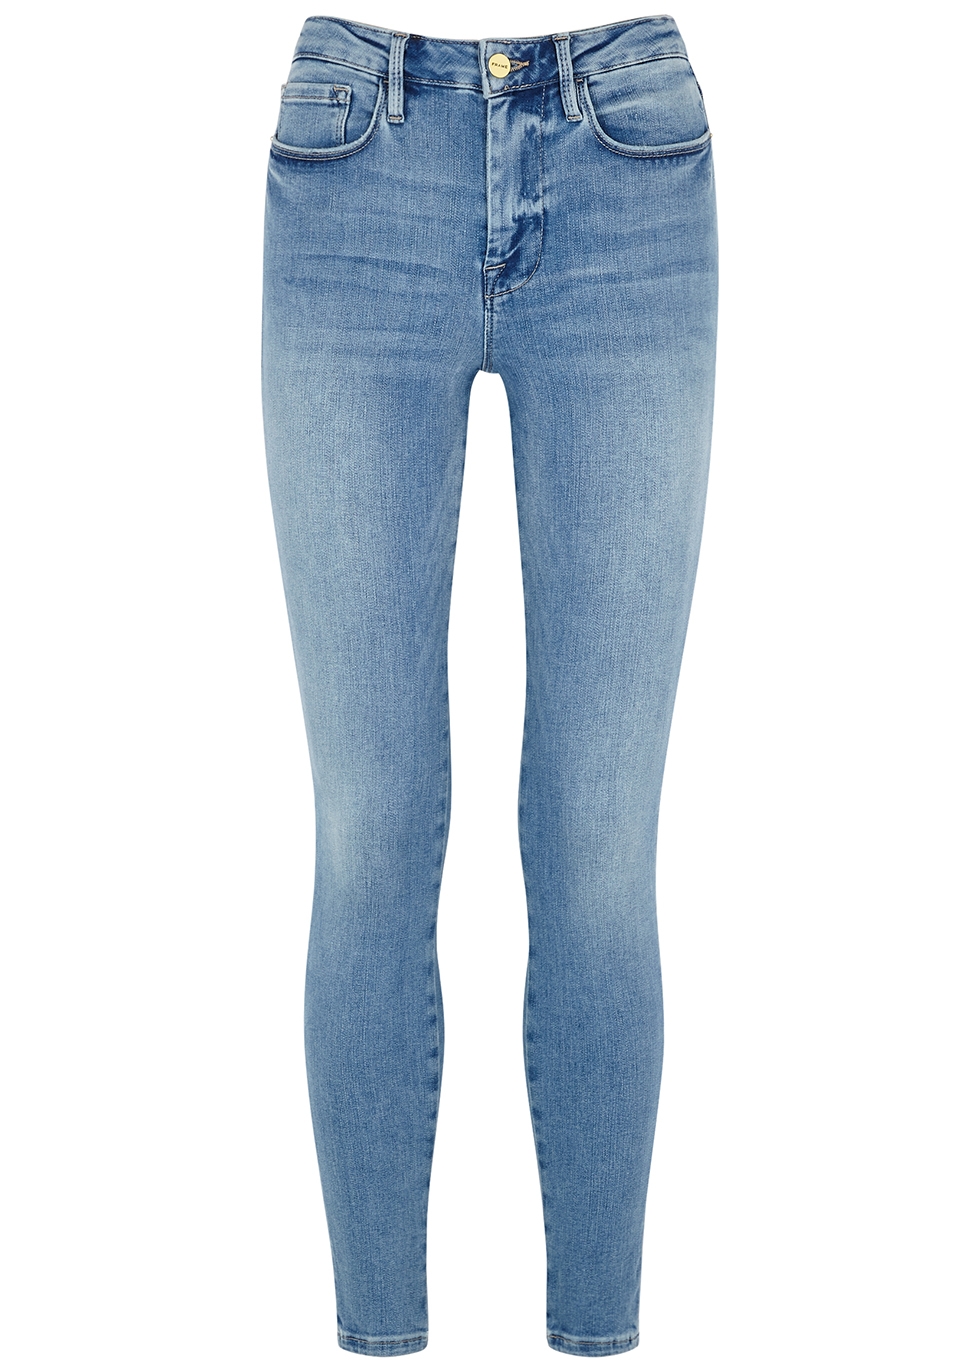 Le One light blue skinny jeans